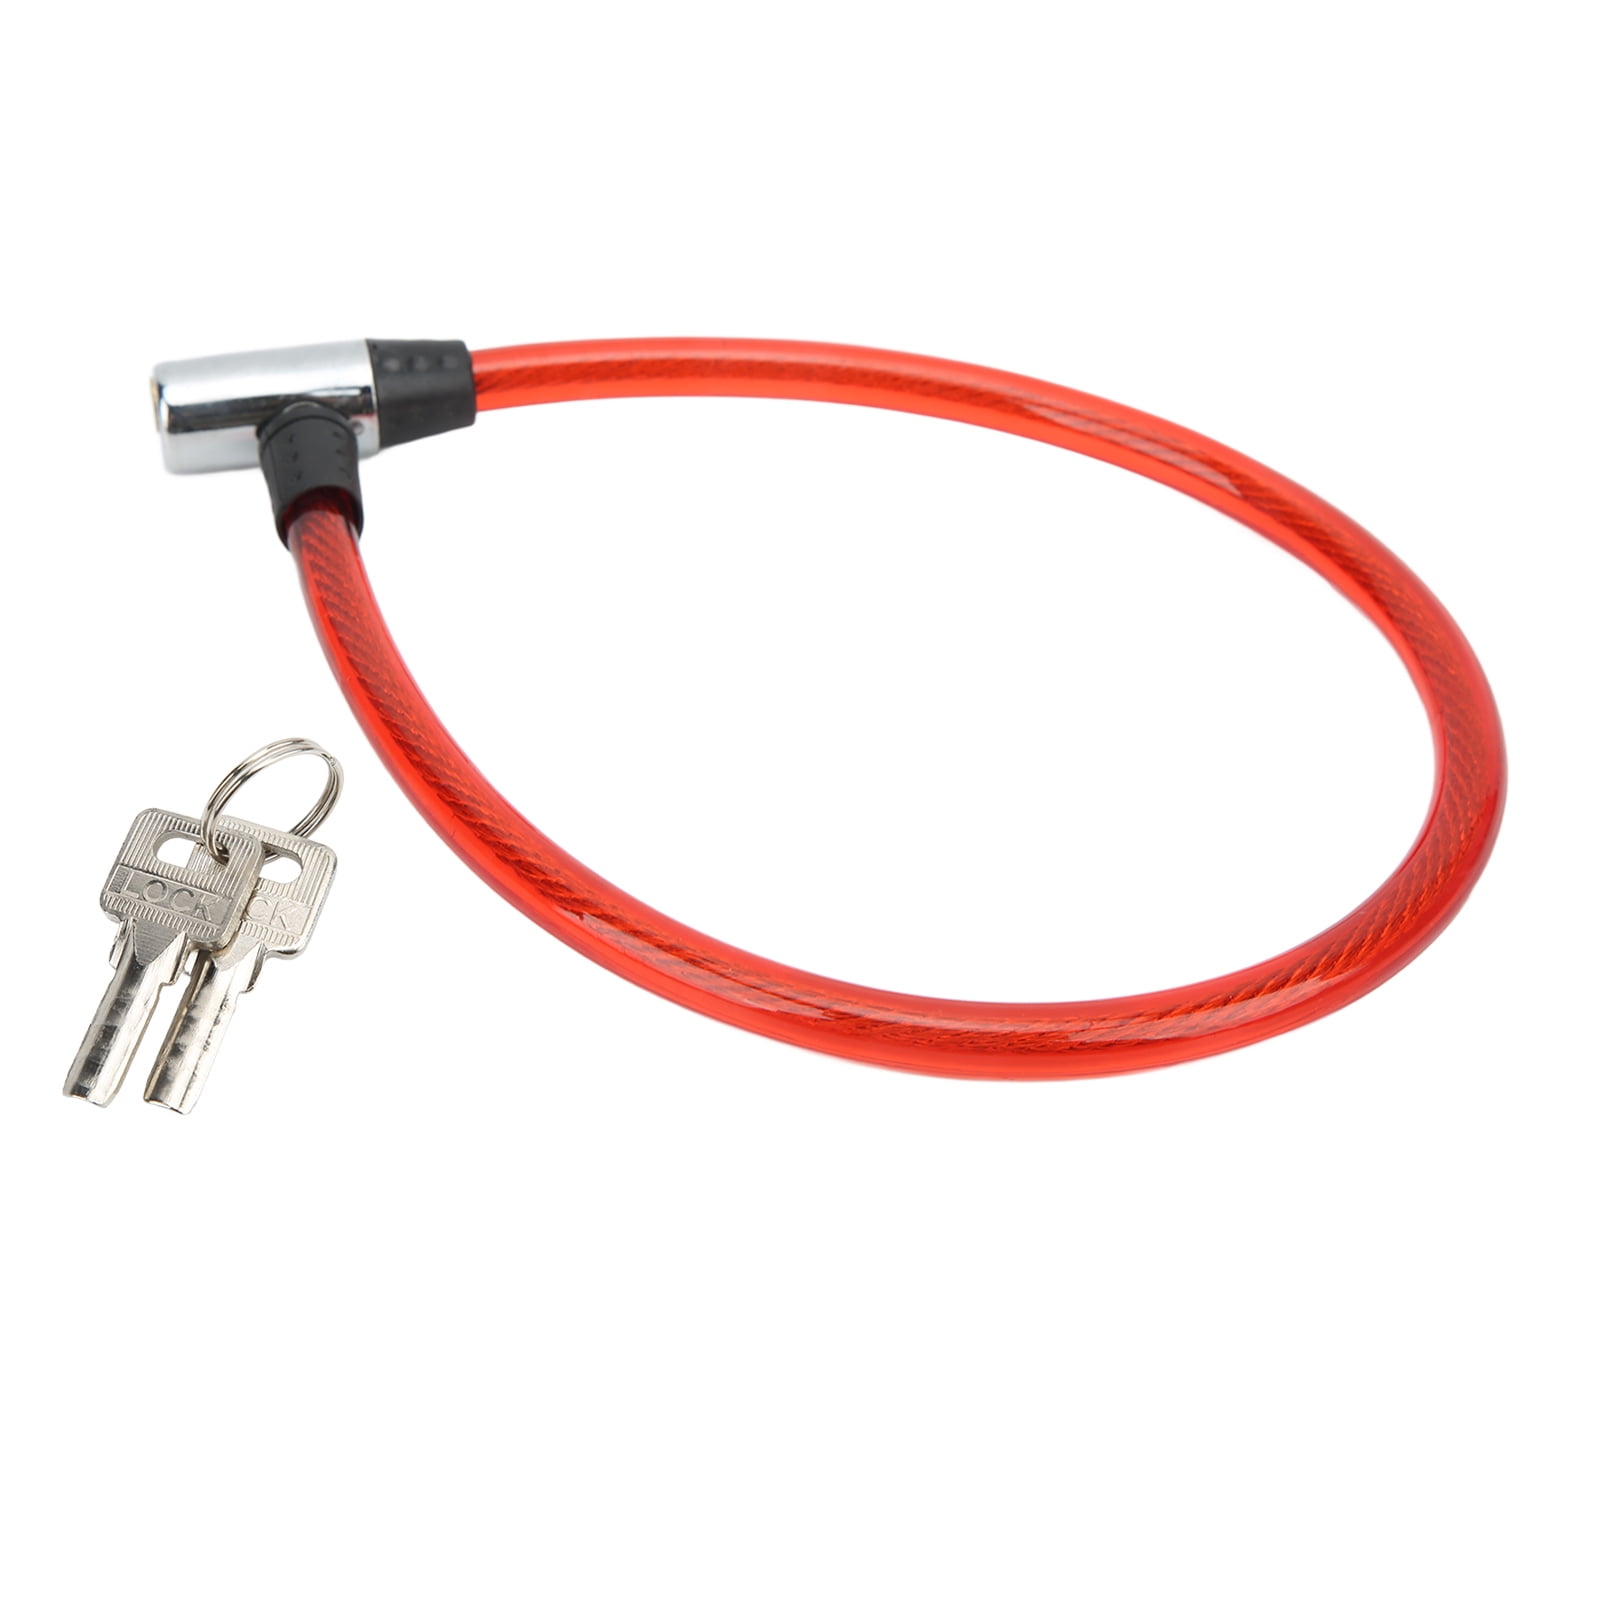 Buy Link 56cm Iron & Steel Multipurpose Cable Lock with 2 Keys for Cycles,  Bikes, Helmets & Scooters, CL-03 Online At Price ₹154